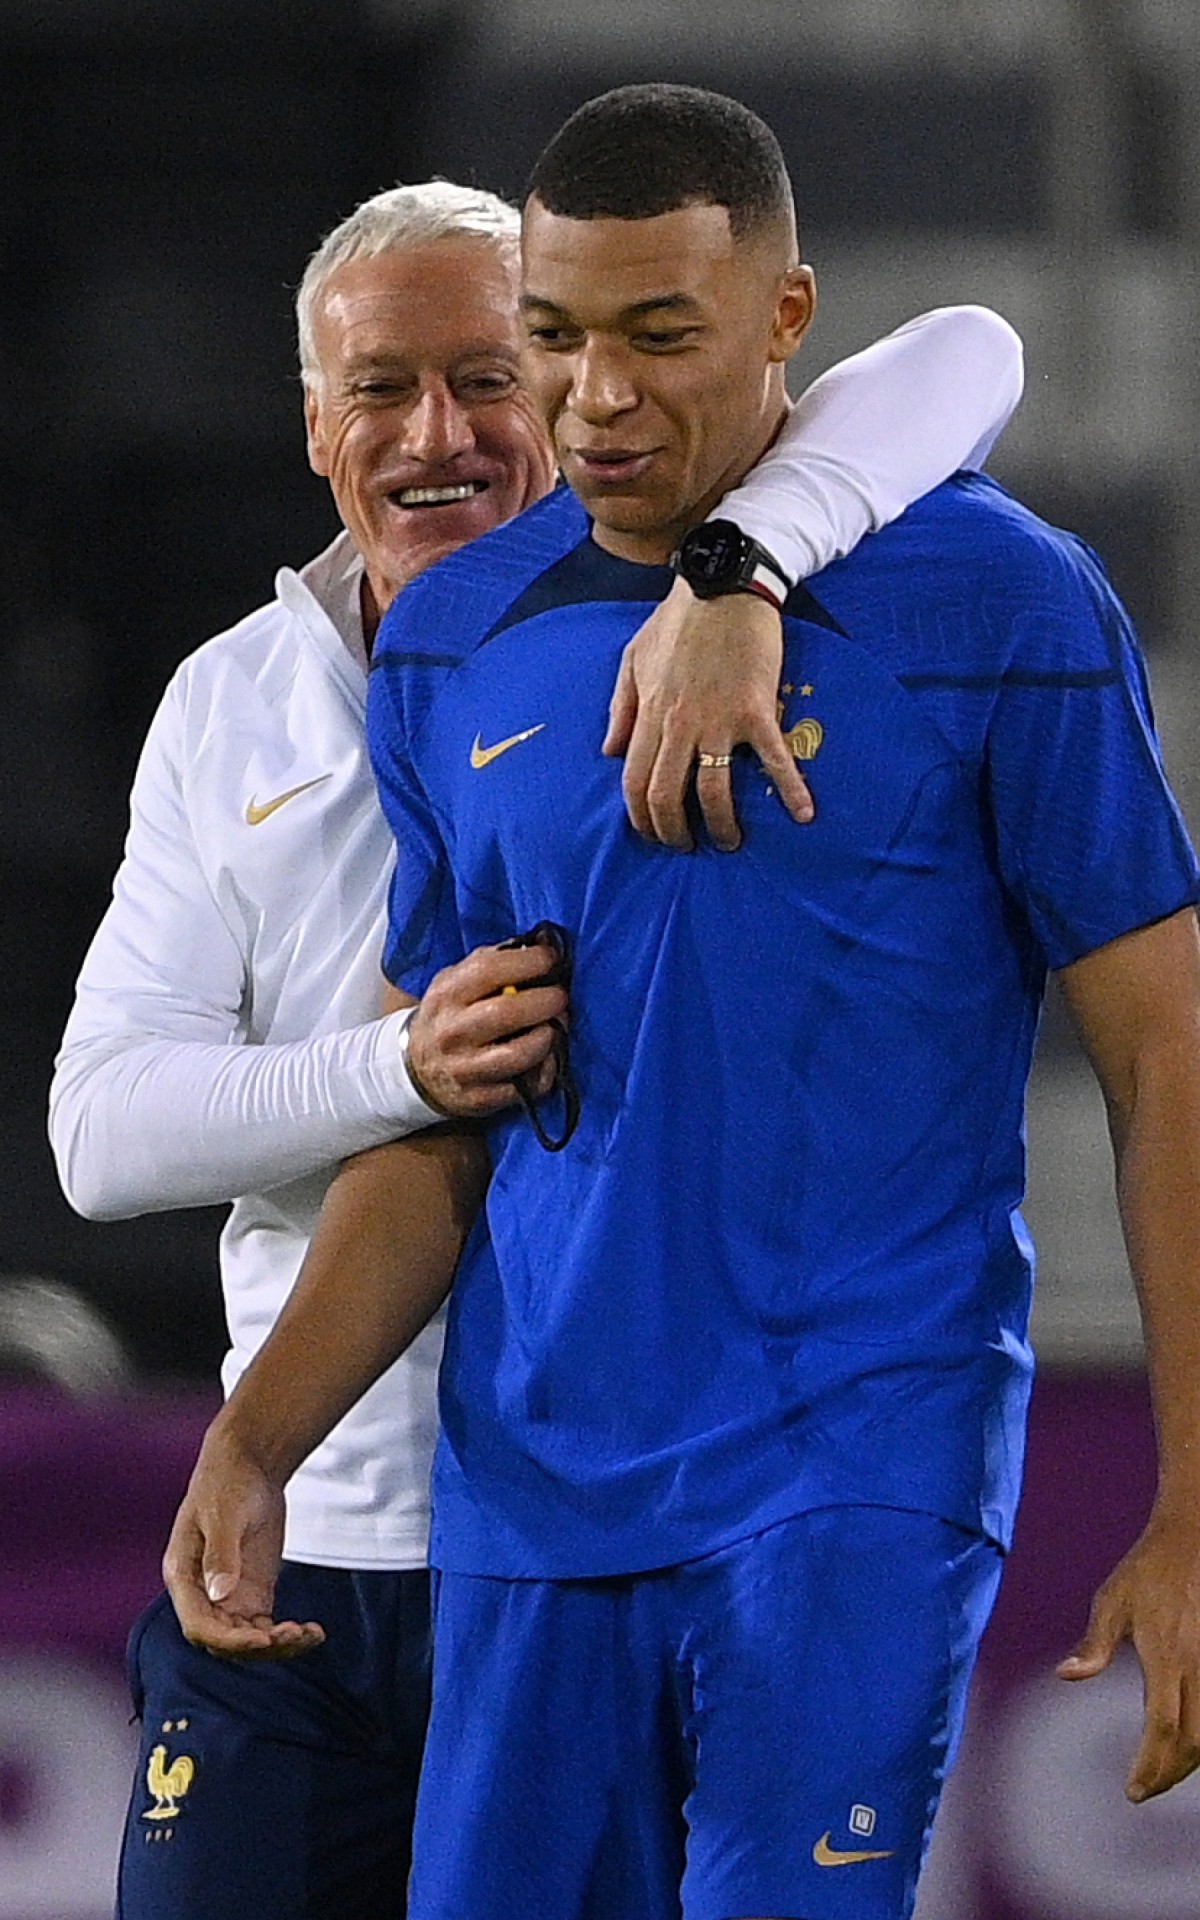 France's coach Didier Deschamps jokes with France's forward #10 Kylian Mbappe during a training session at Al Sadd SC Stadium in Doha, on December 9, 2022, on the eve of the Qatar 2022 World Cup quarter-final football match between England and France.
FRANCK FIFE / AFP - FRANCK FIFE / AFP